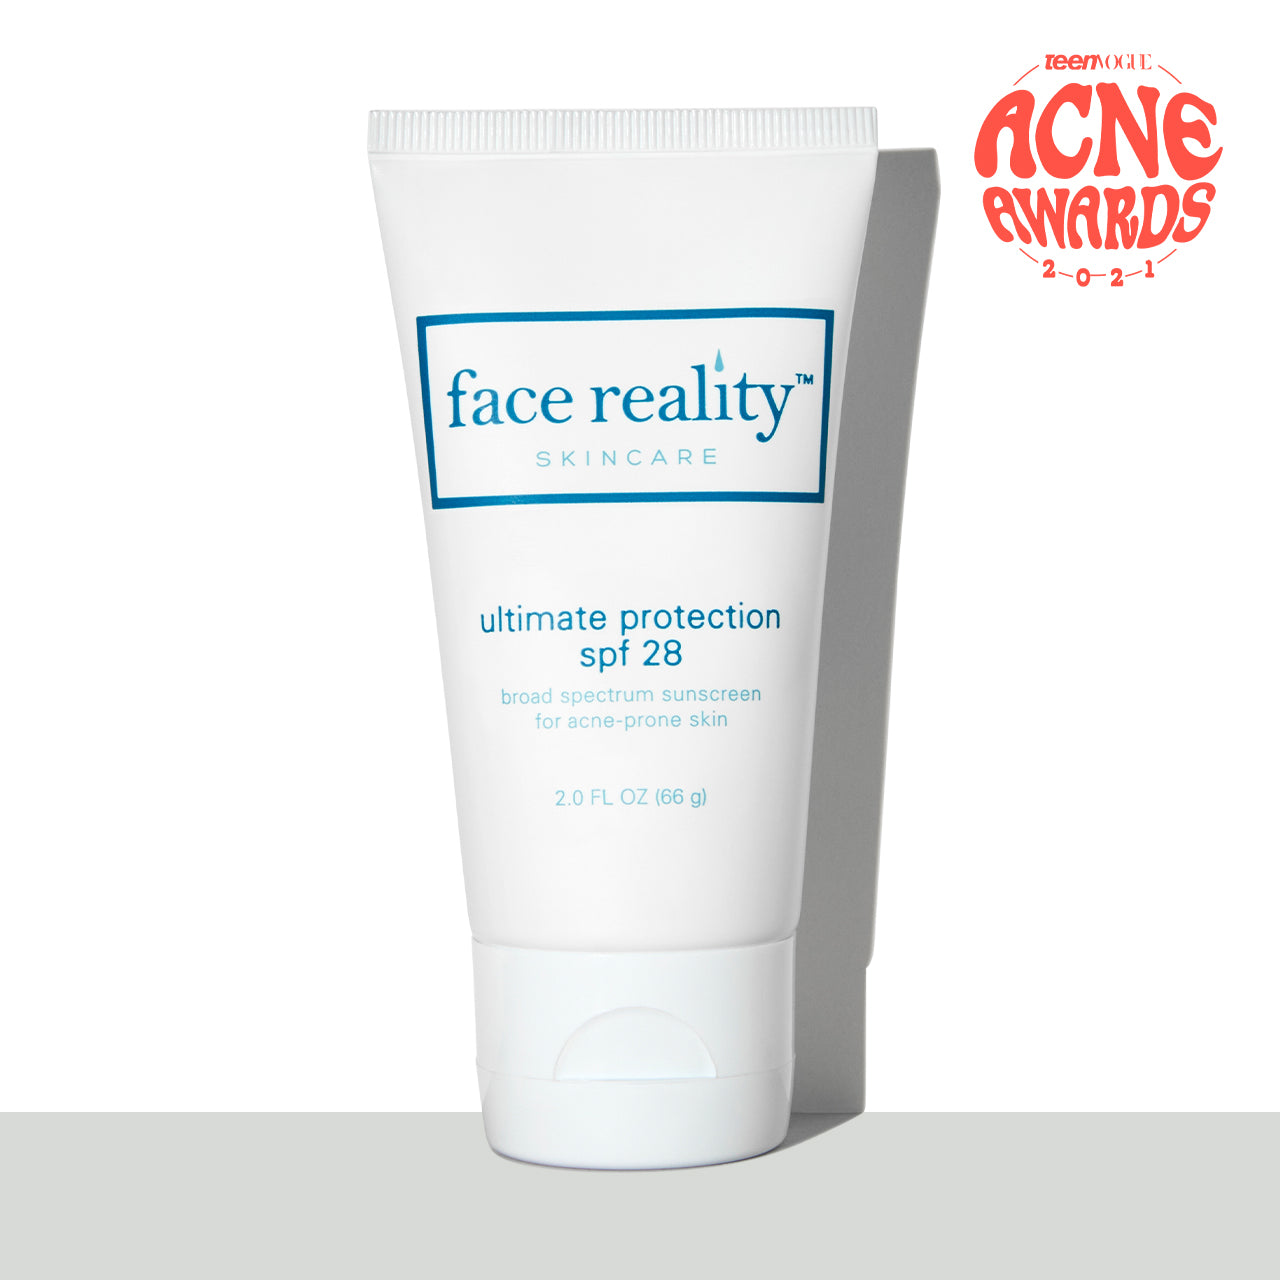 white two ounce bottle of Face Reality ultimate protection spf 28 sunscreen in front of white background on a grey surface with teen vogue acne awards 2021 award stamp